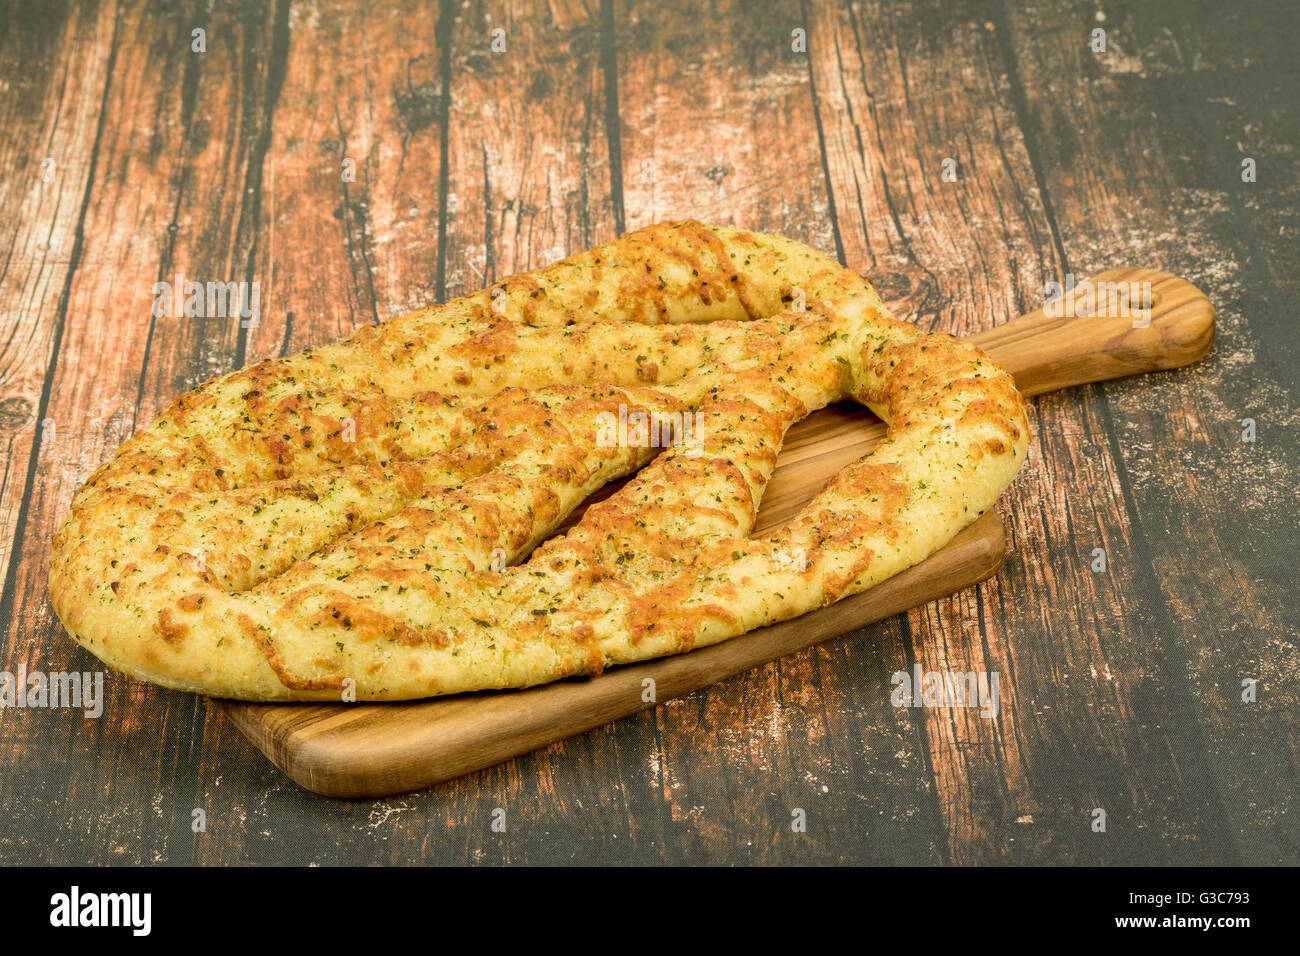 An authentic French Fougasse or Foccaccia bread from Provence, France.   This bread is made with olive oil, garlic, rosemary Stock Photo